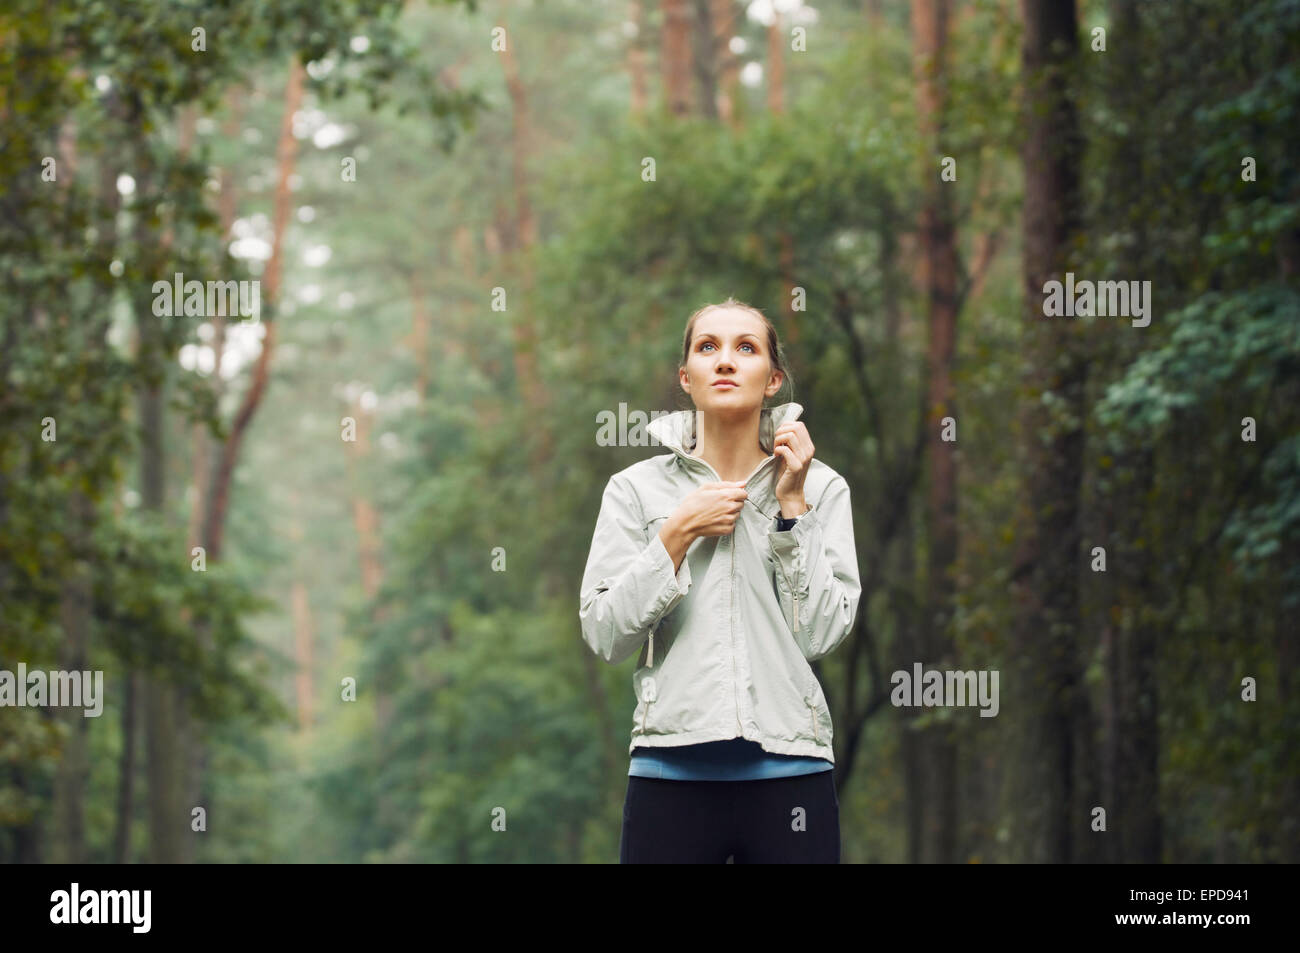 healthy lifestyle fitness sporty woman running early in the morning in forest area, fitness healthy lifestyle concept Stock Photo